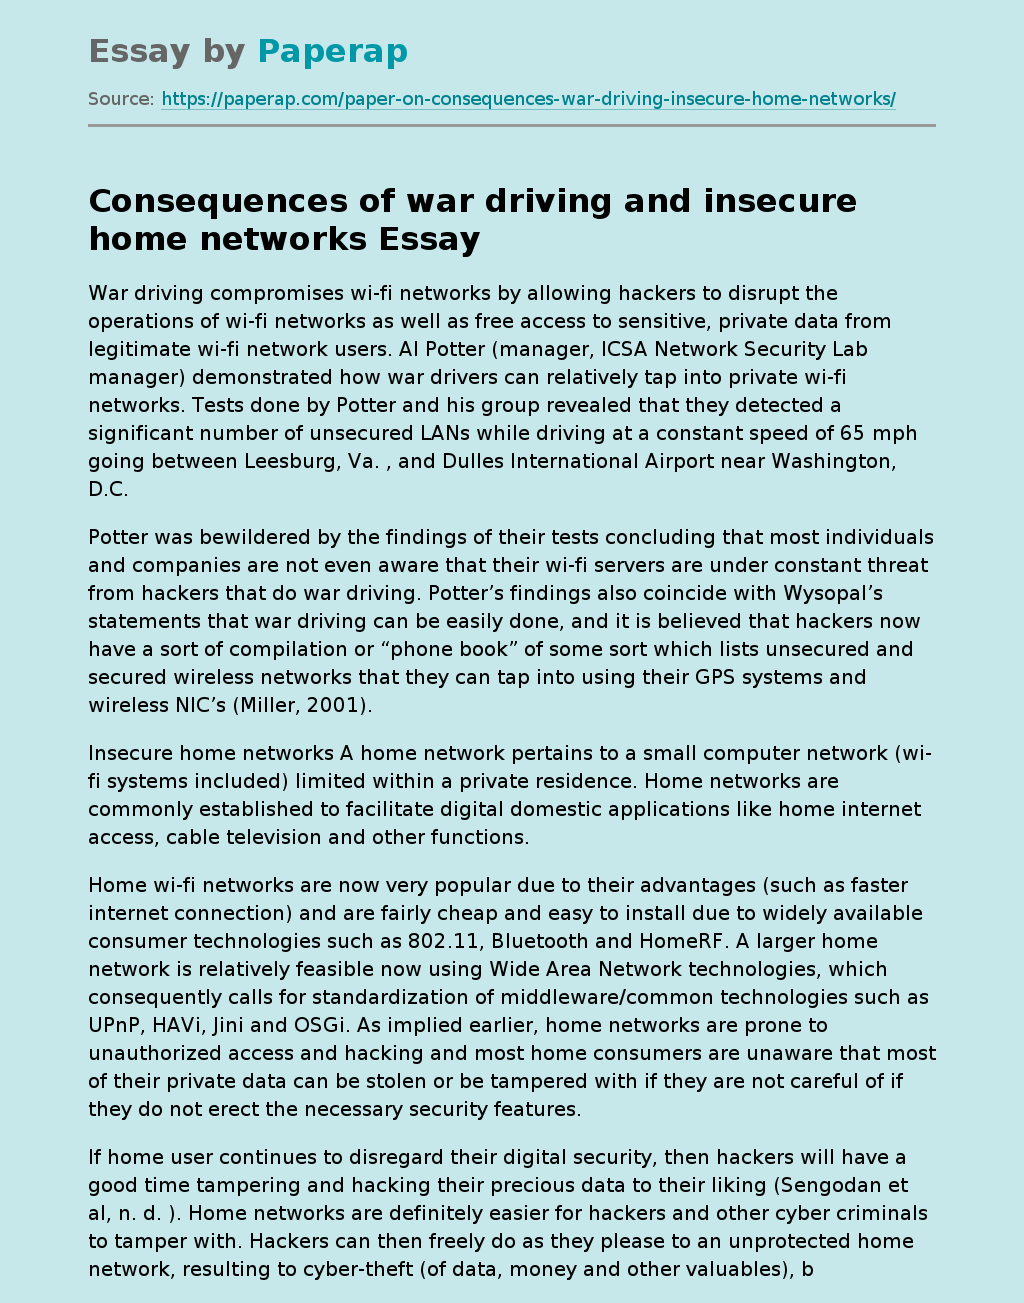 Consequences of war driving and insecure home networks